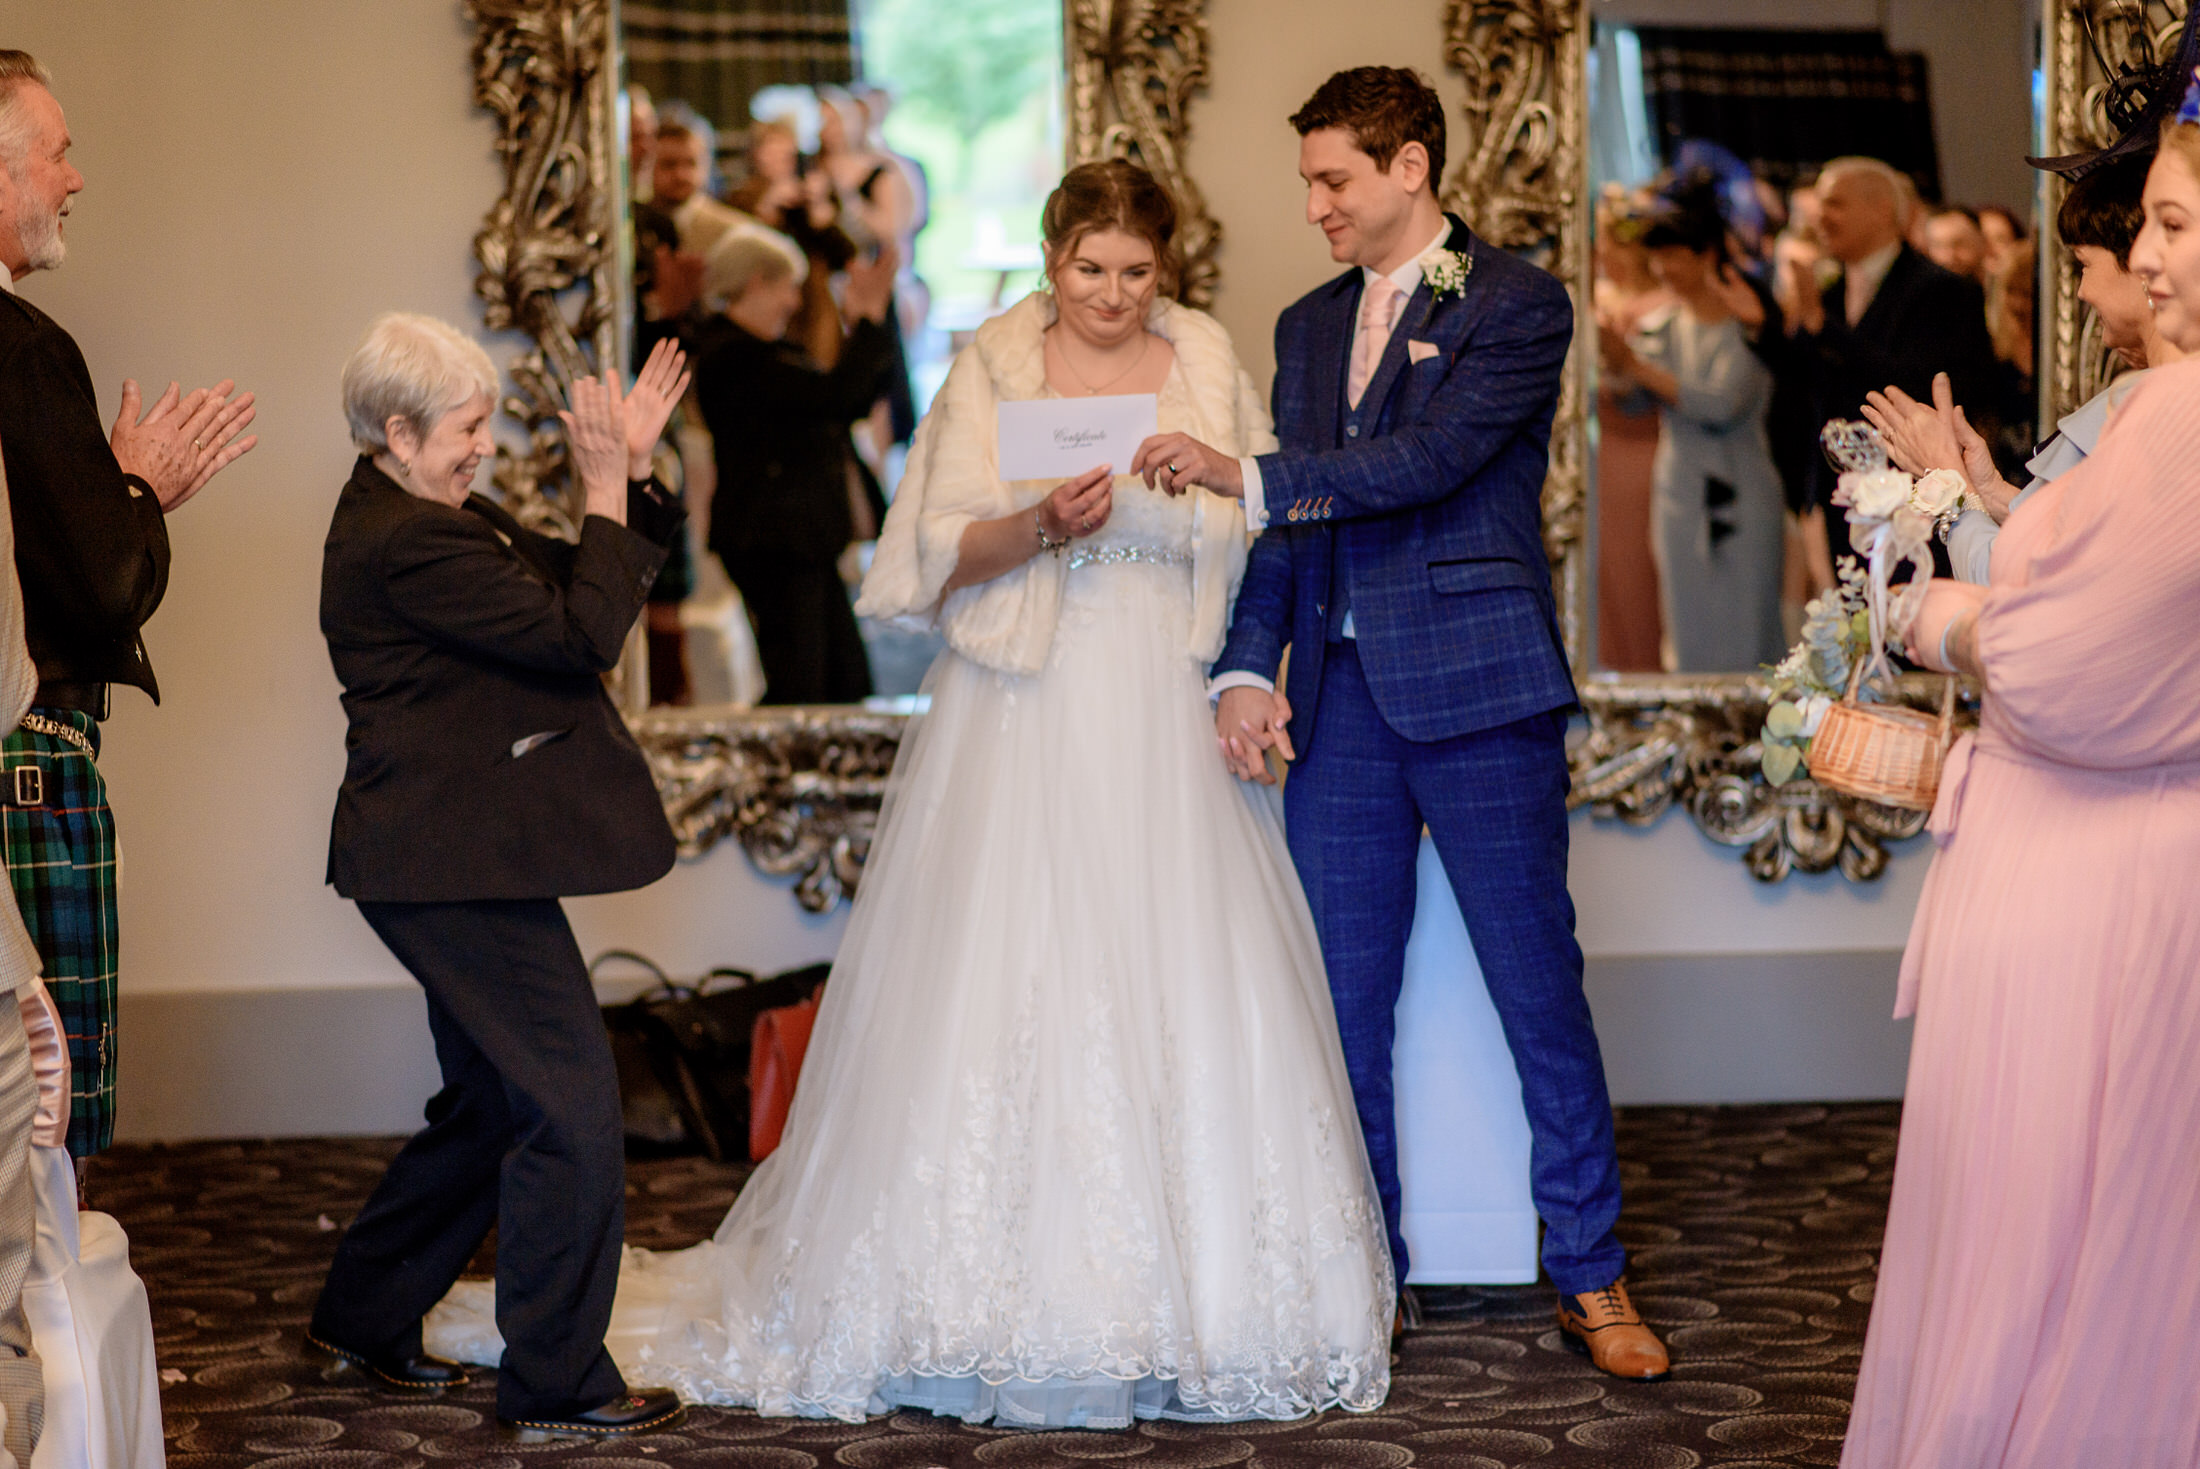 A bride and groom exchanging their vows at a Brackenborough Hotel wedding ceremony.